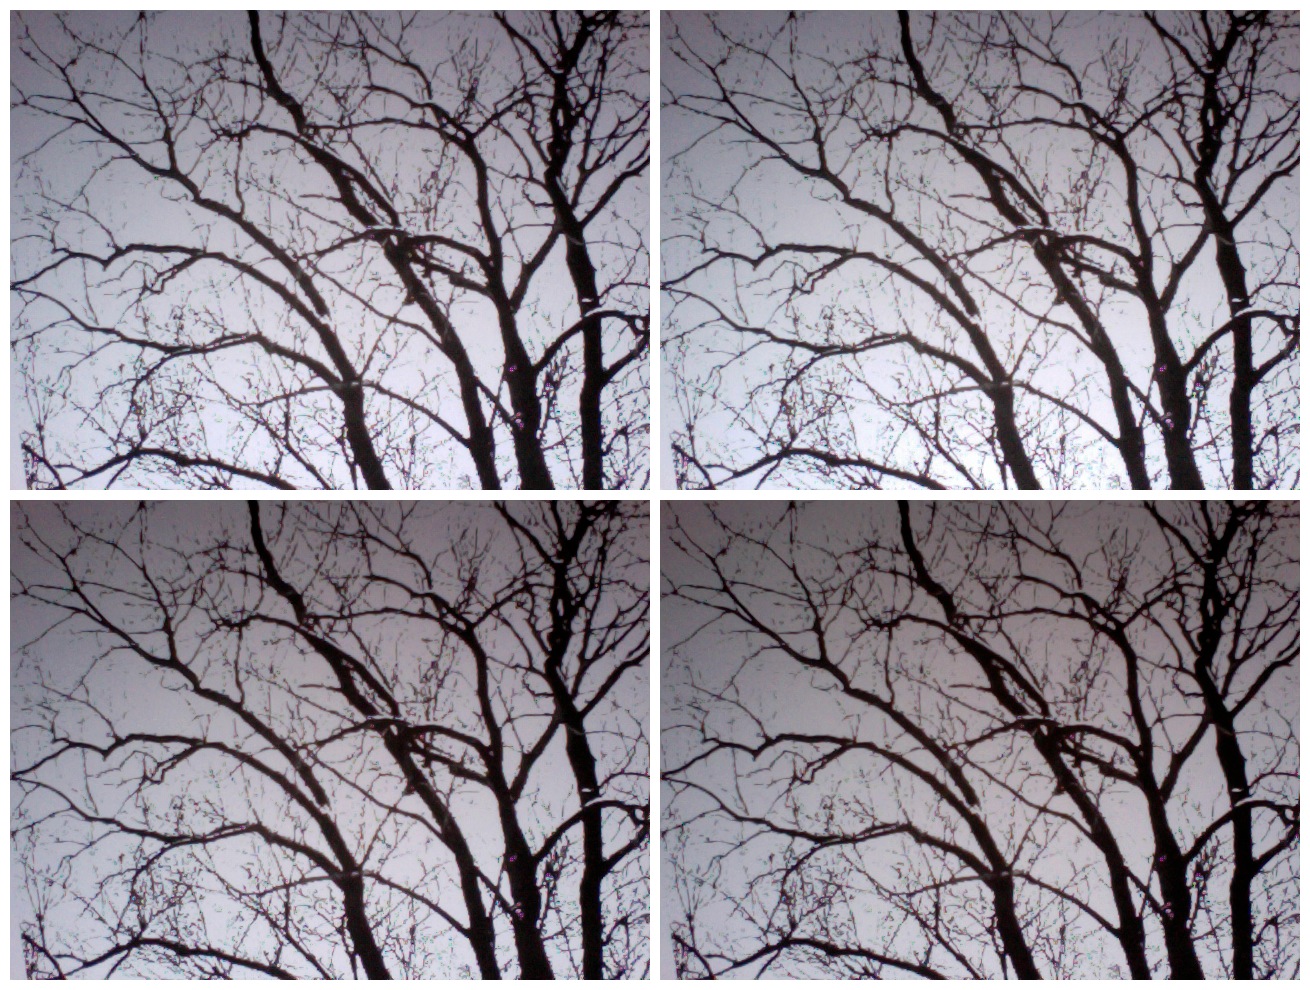 Glimpse of solace: Branches